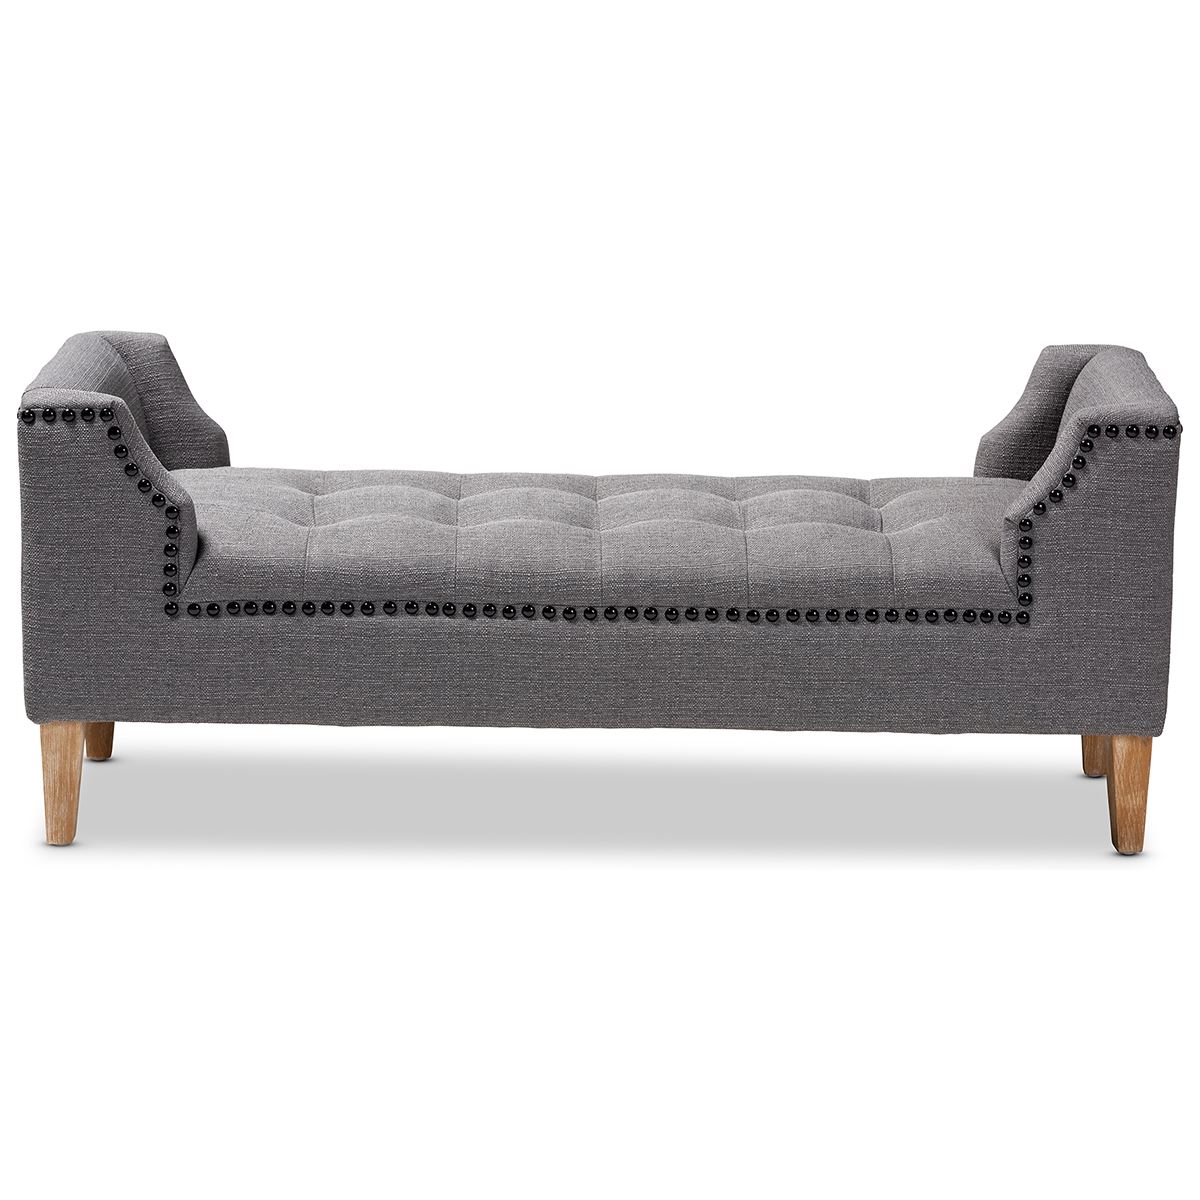 Baxton Studio Perret Polyester Fabric Wood Bench